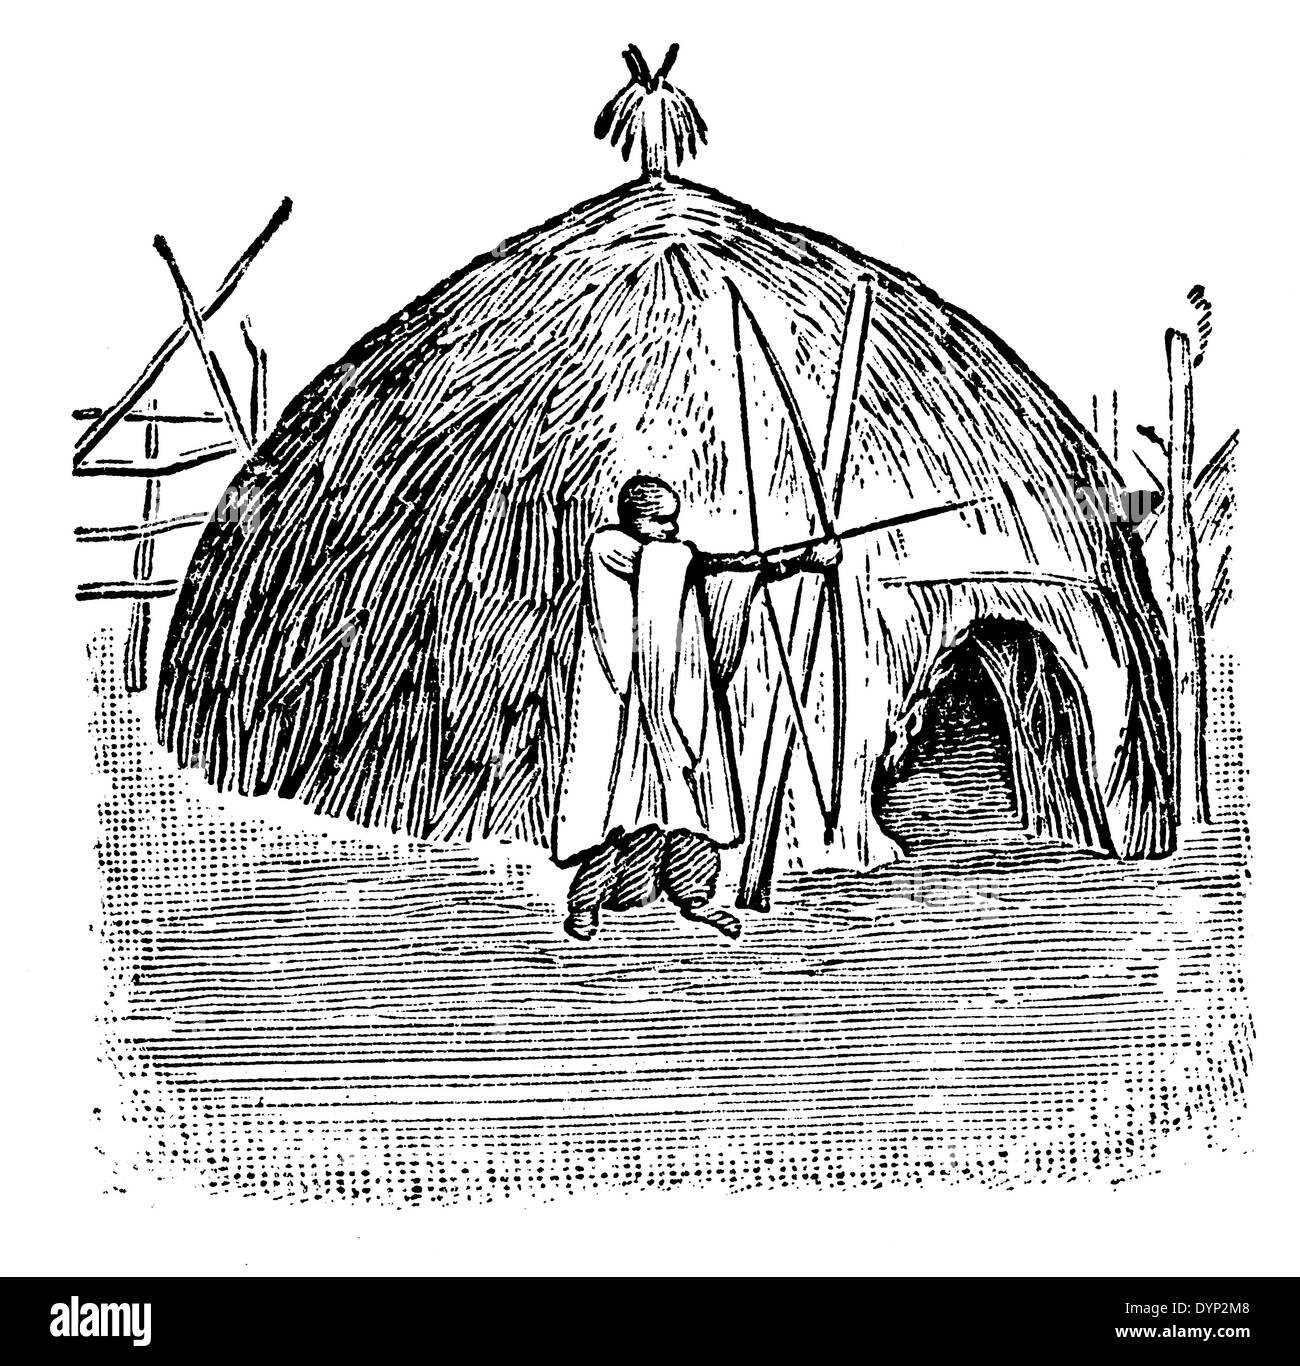 Rural hut, West Africa, traditional house, illustration from Soviet encyclopedia, 1926 Stock Photo